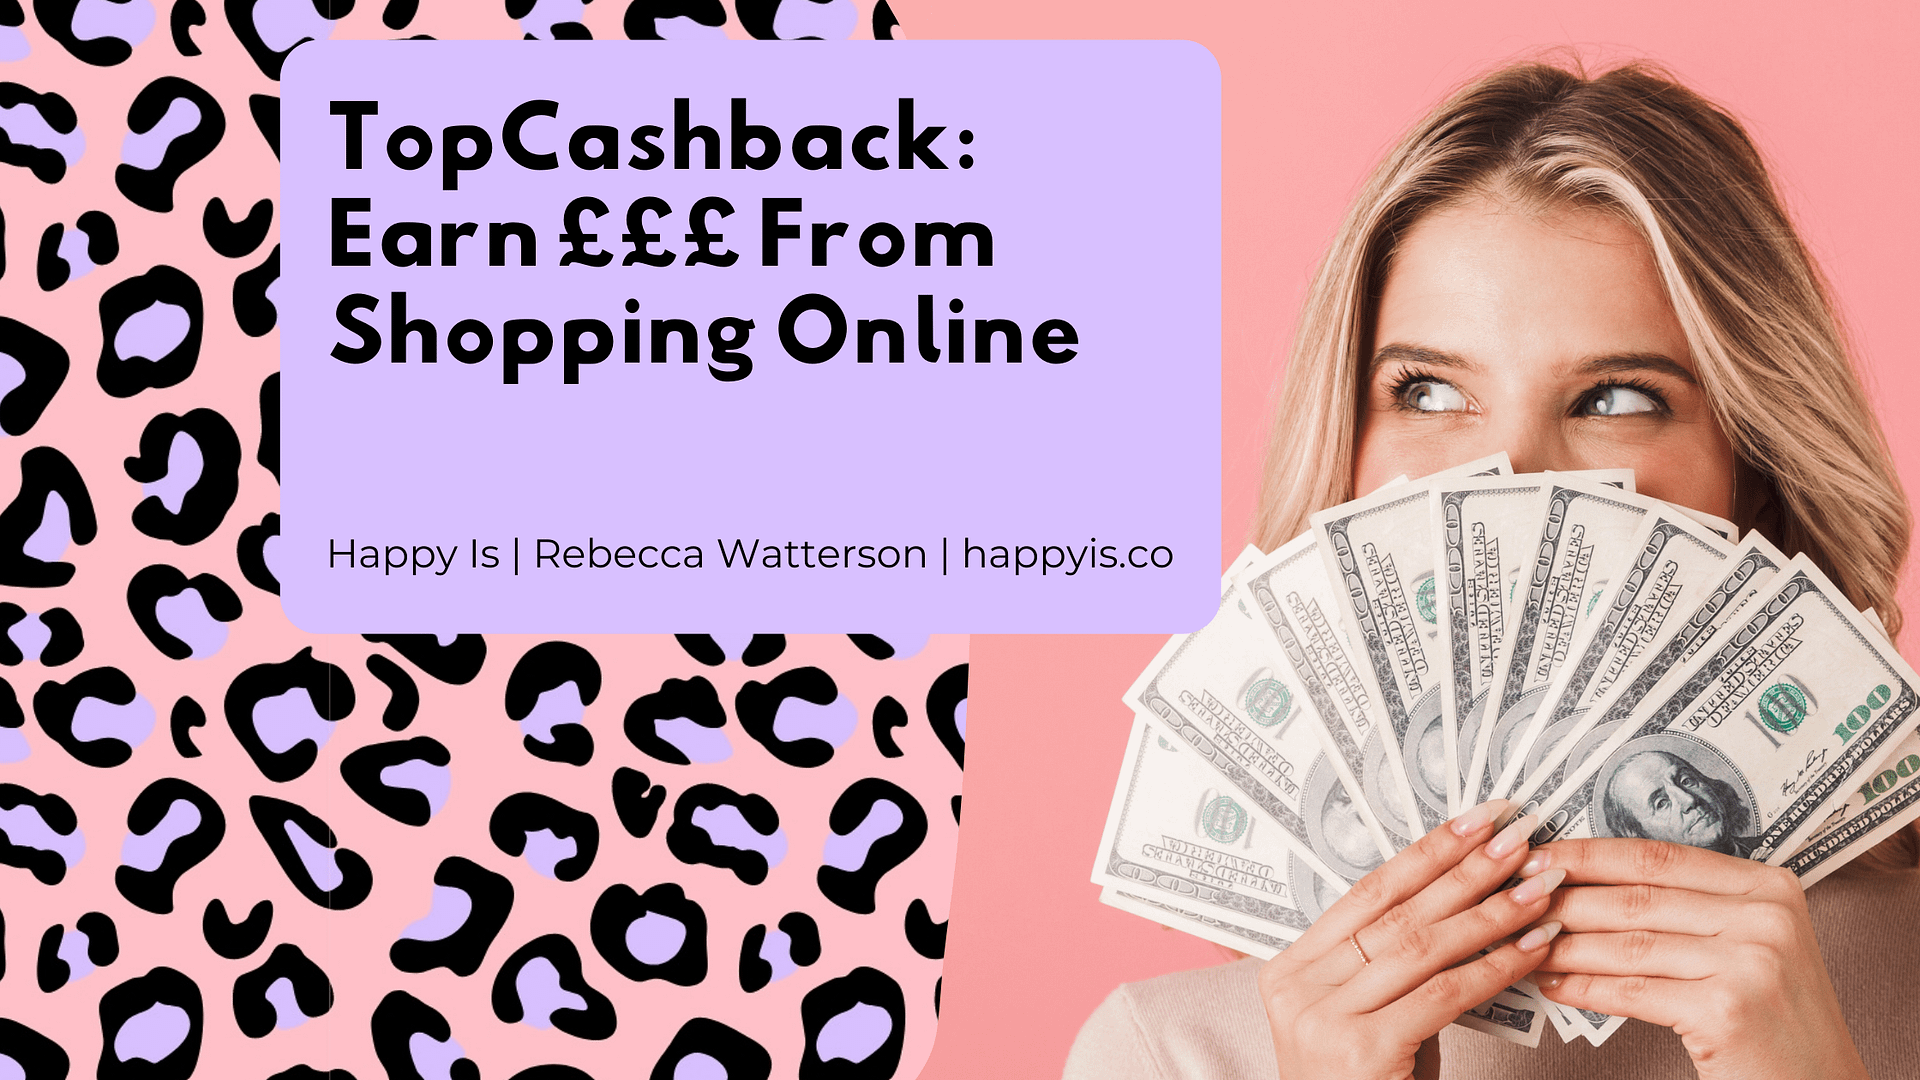 How TopCashback Works: Earn Money From Shopping Online On The #1 Cashback Site